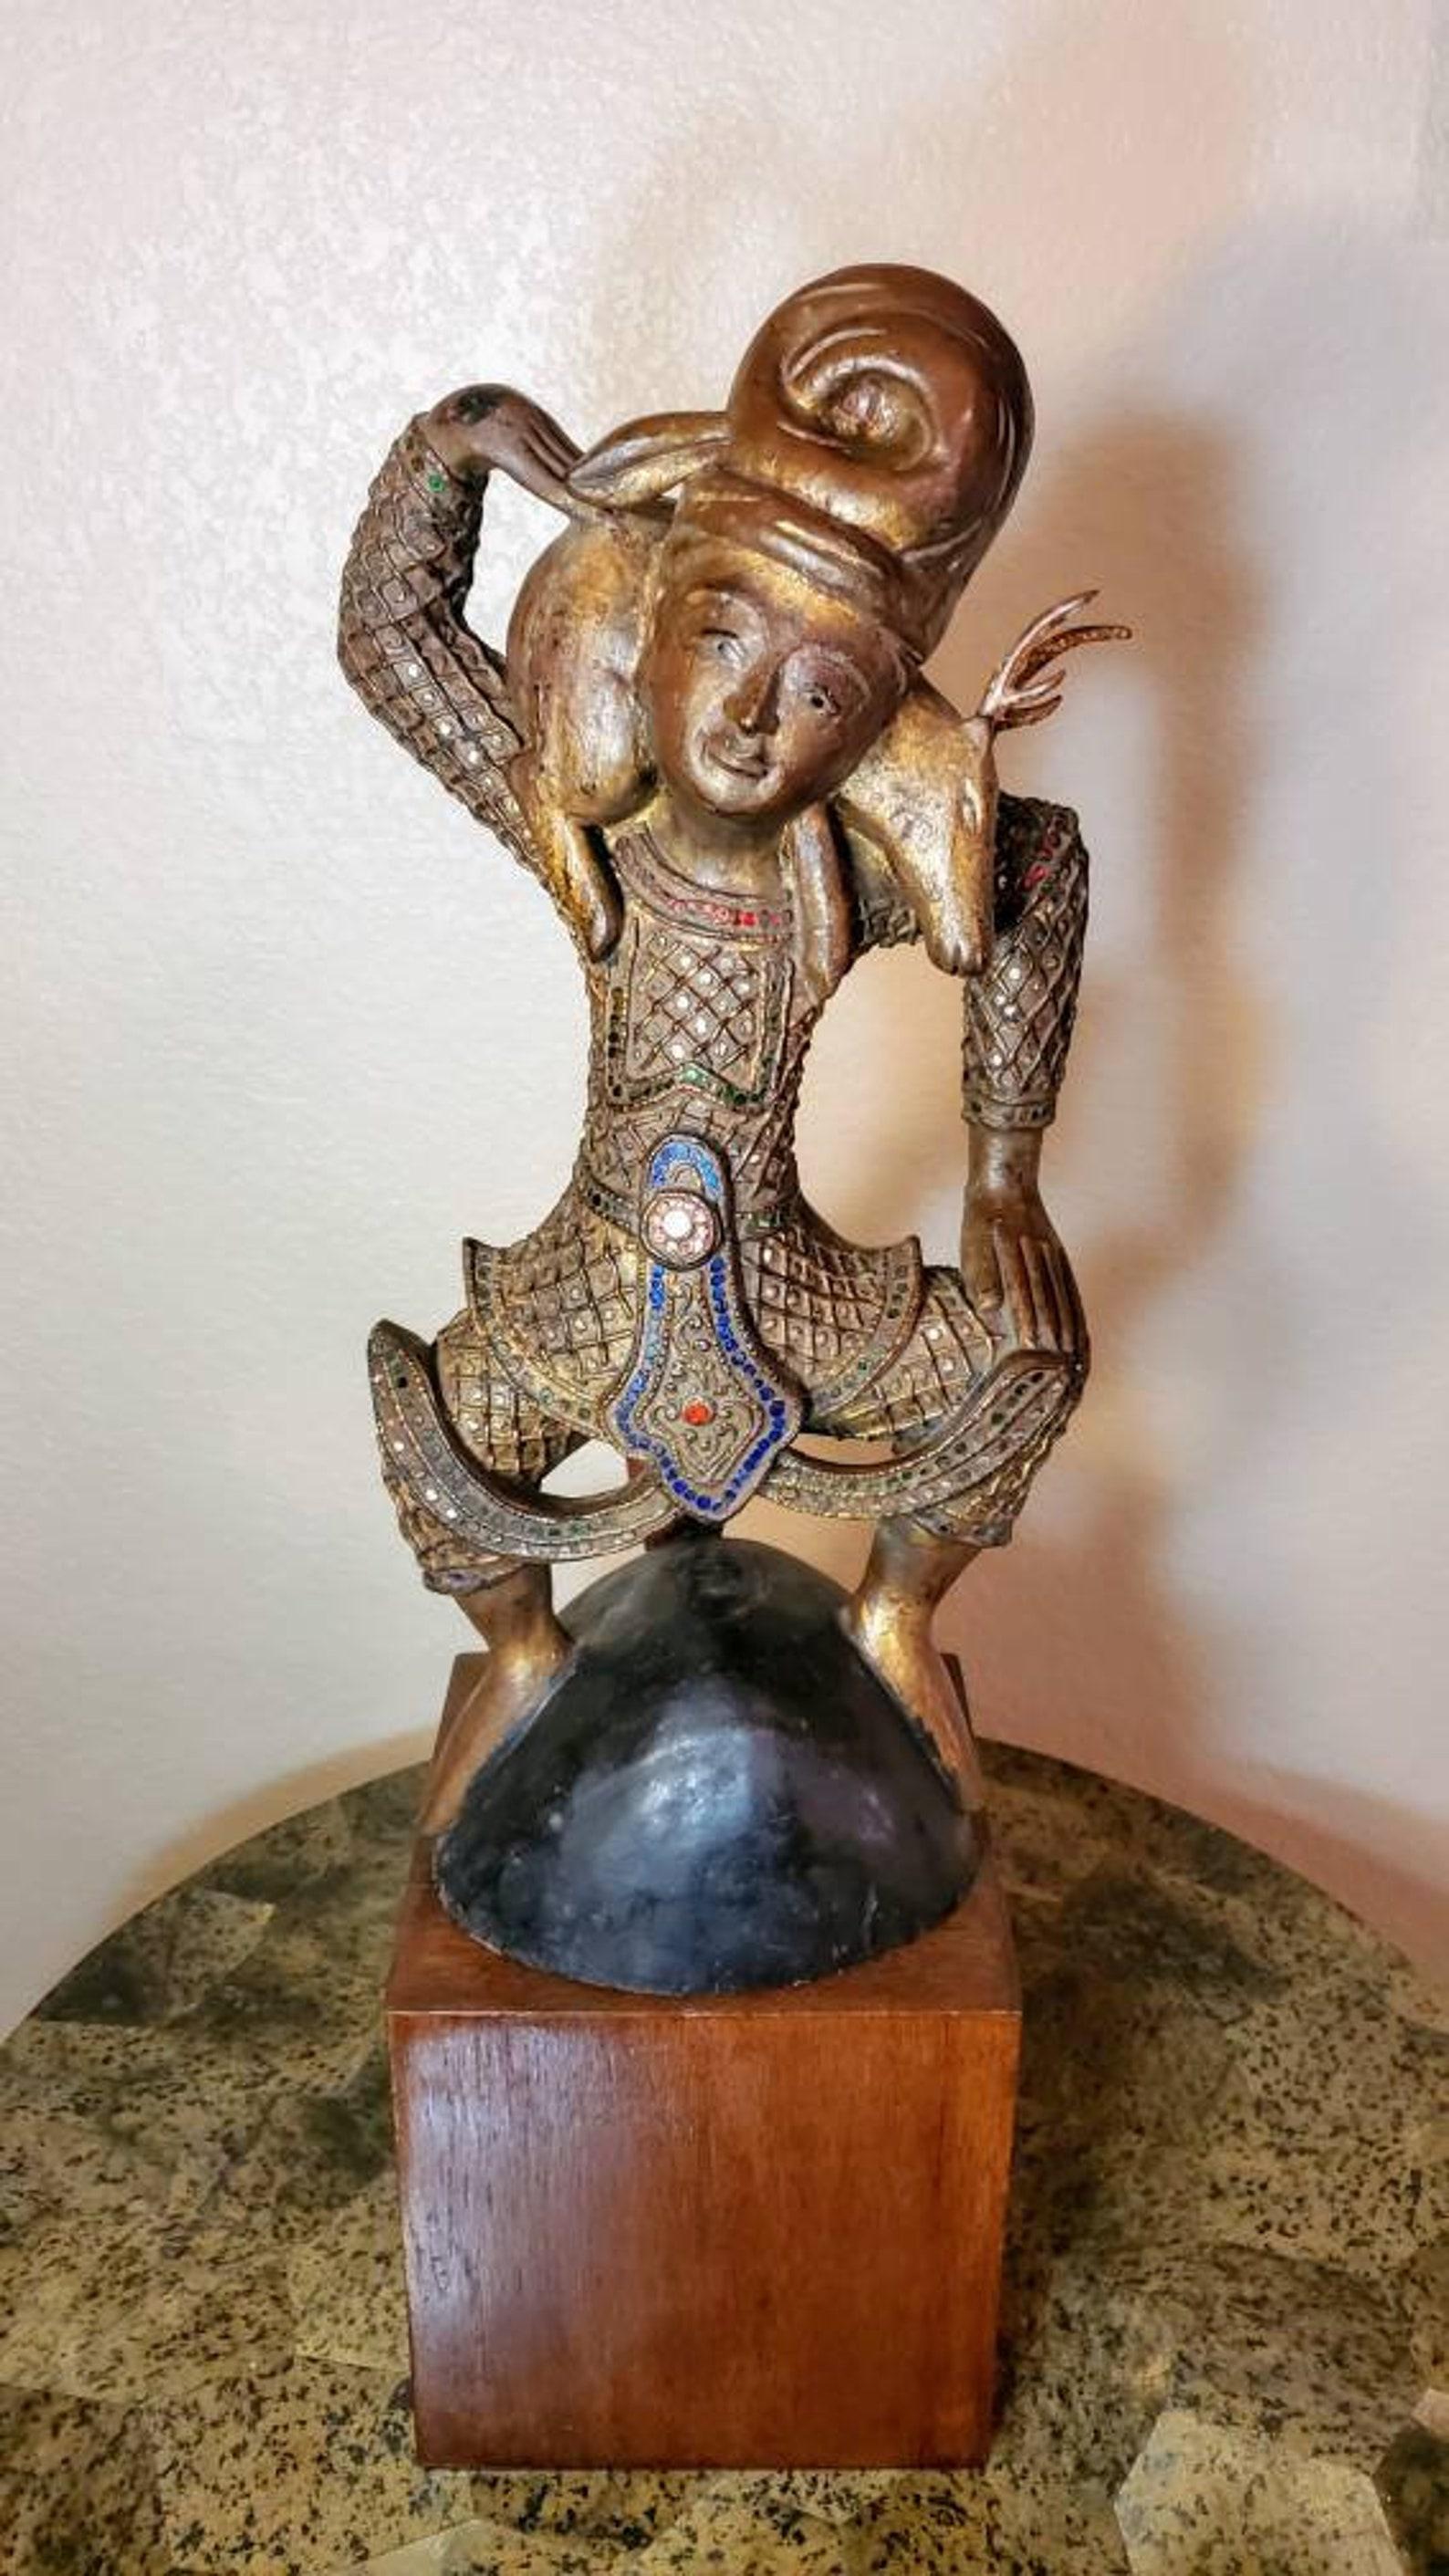 A rare and exceptional antique Southeast Asian Burmese hand carved and gilded teak wood religious figure Buddhist temple -monastery sculpture. 

Exquisitely hand-crafted in Burma (present day Myanmar) in the late 19th century, finely sculpted from a